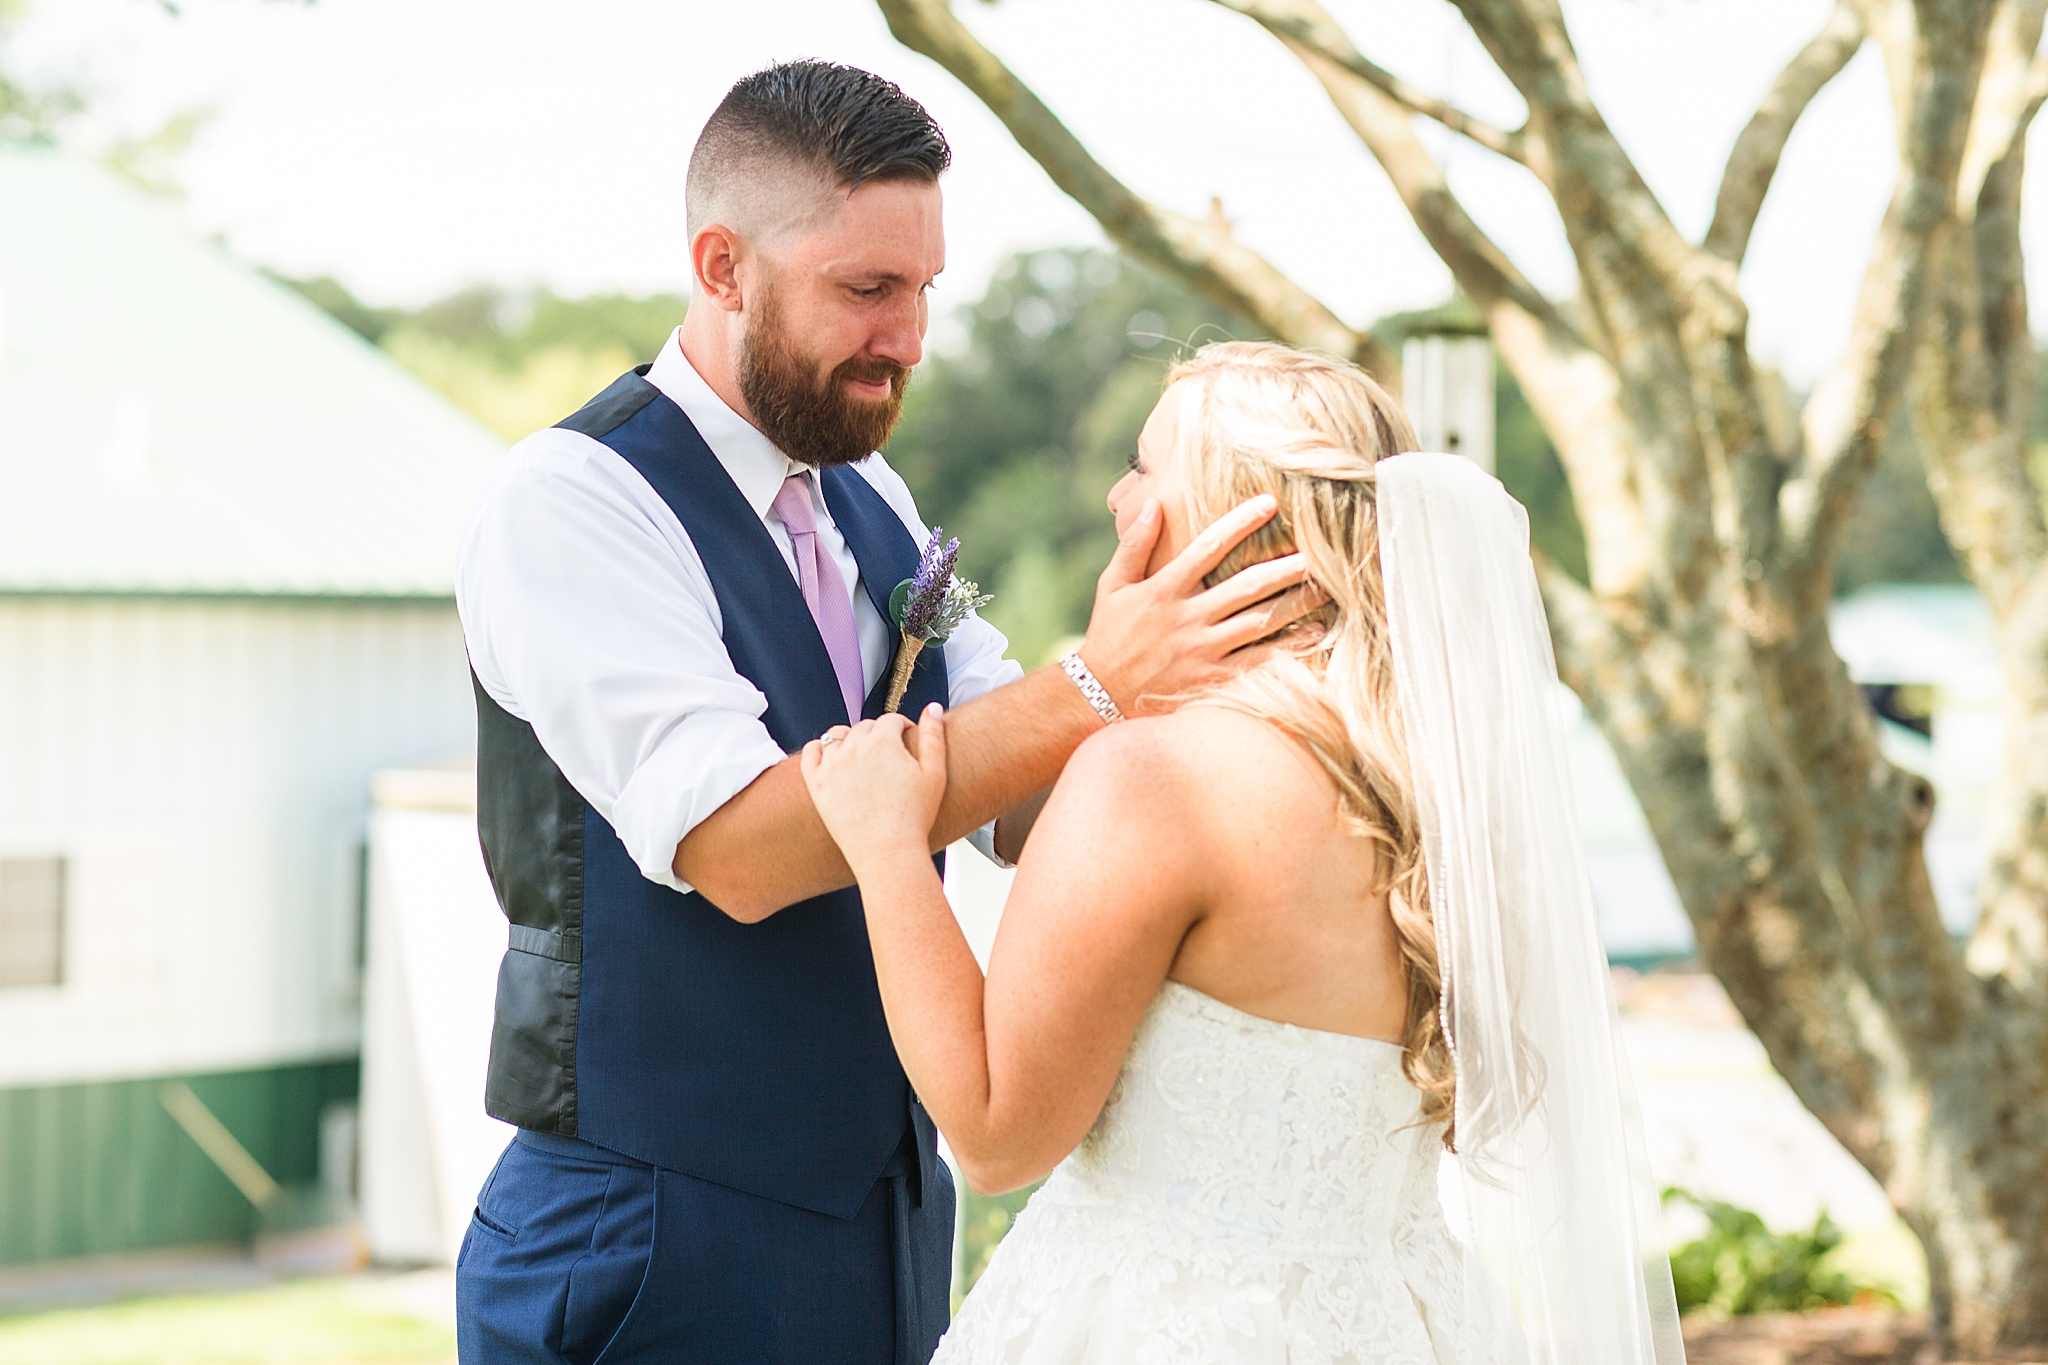 emotional groom's reaction to seeing bride for the first time photographed by Alexandra Mandato Photography